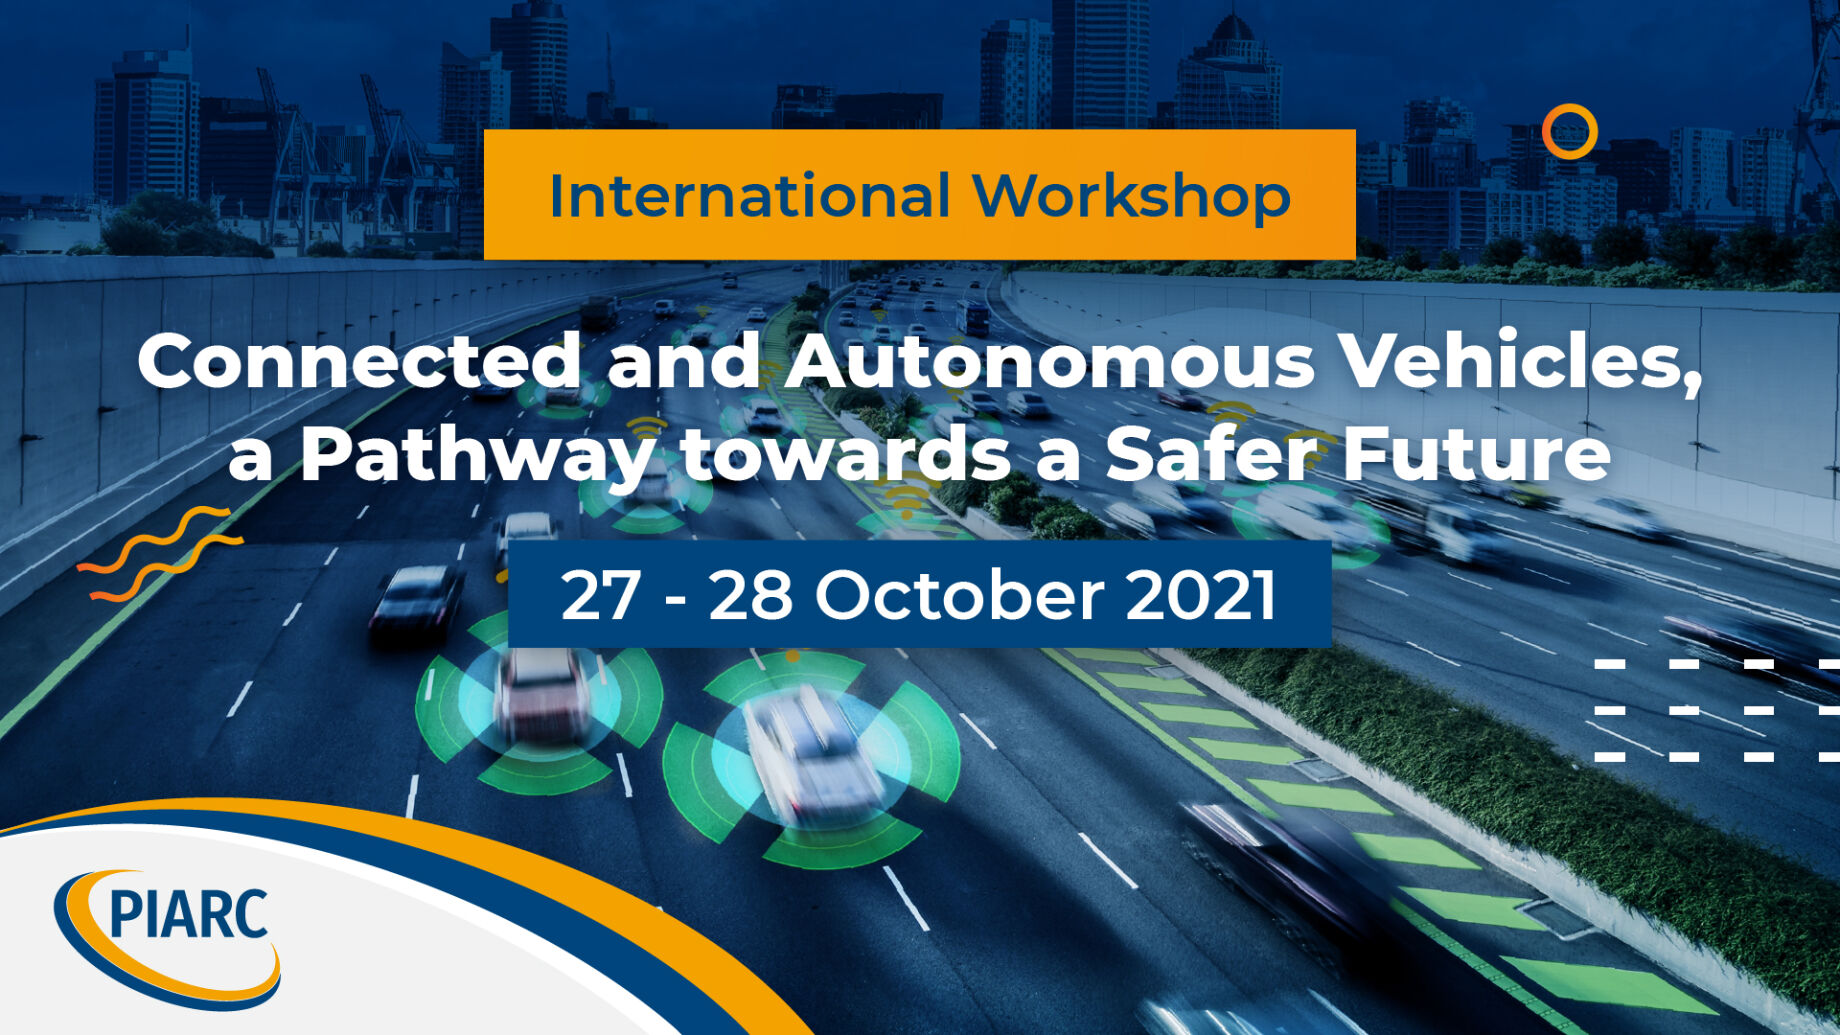 Join us
and take part in this workshop! Learn about connected and automated vehicle
technology and how to progress towards a safer future